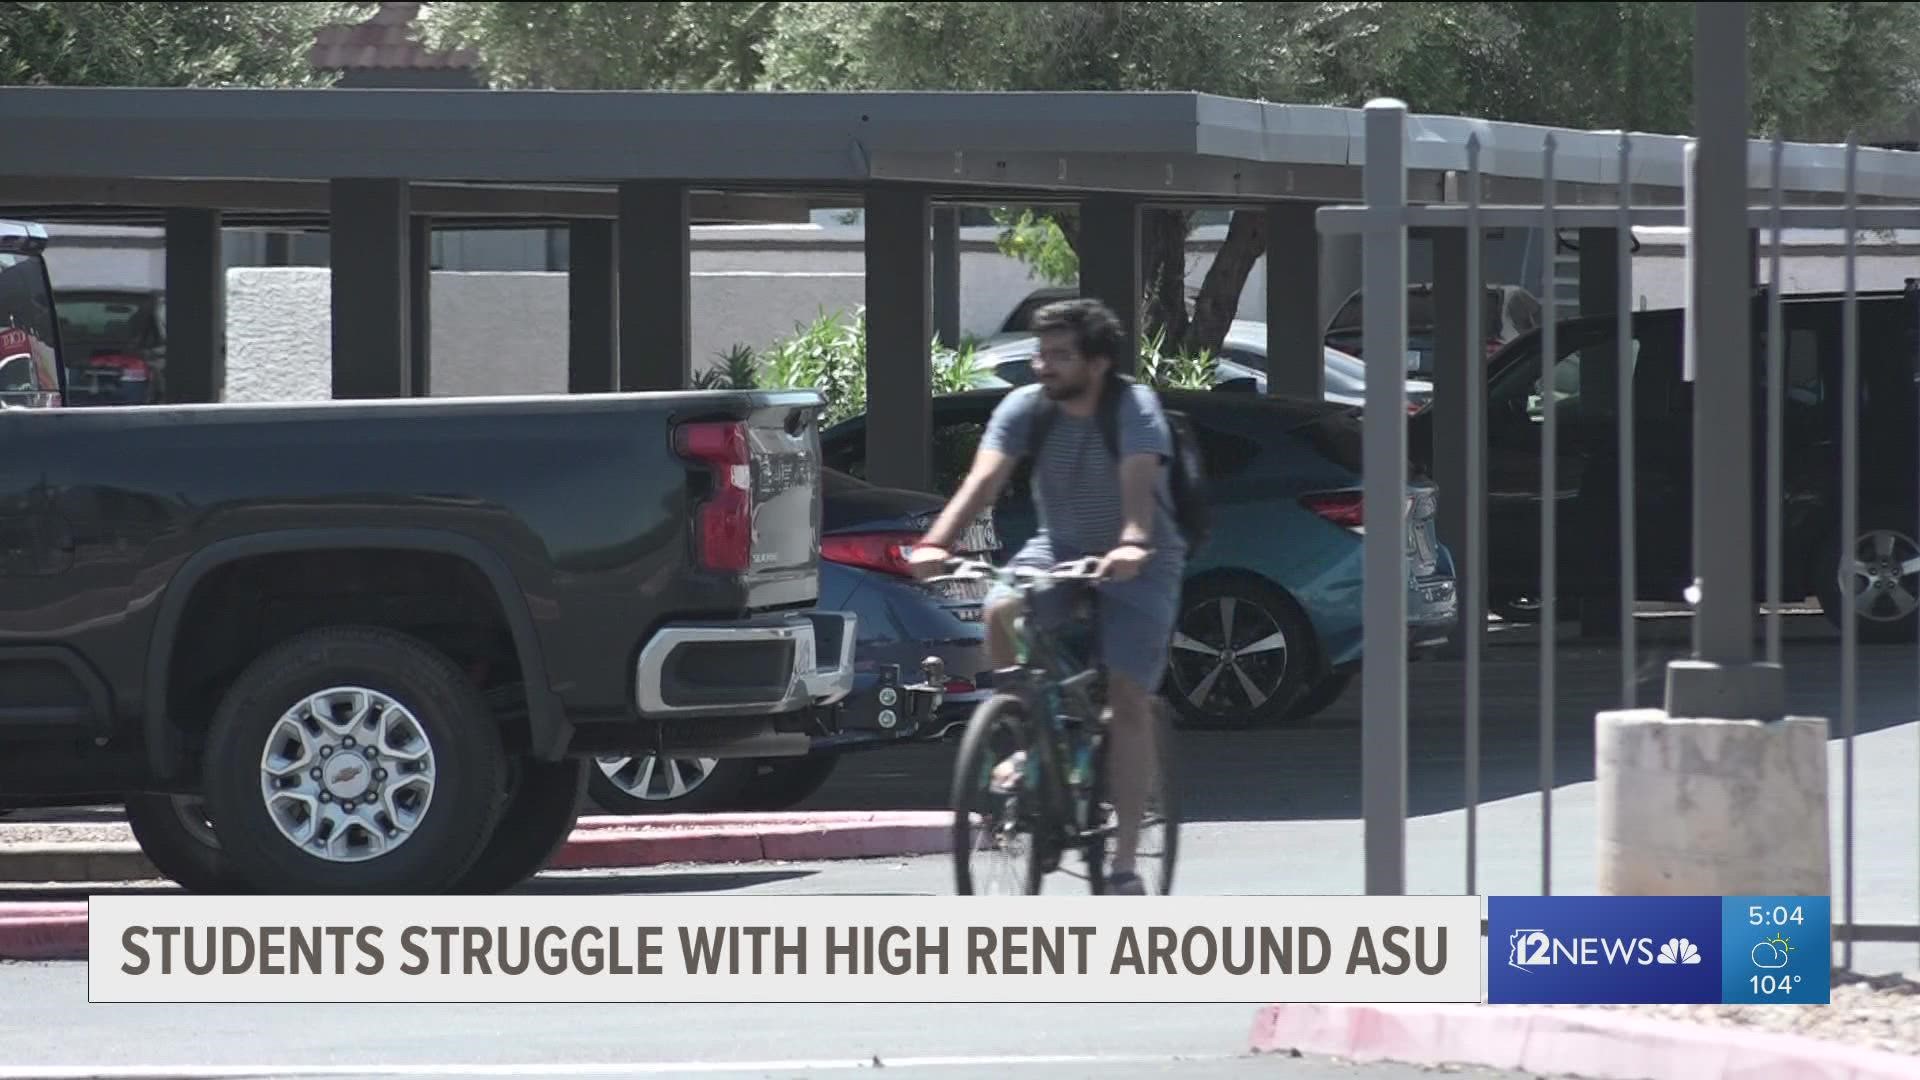 Arizona State University students say it's getting more competitive and difficult to find affordable housing that's close to campus.